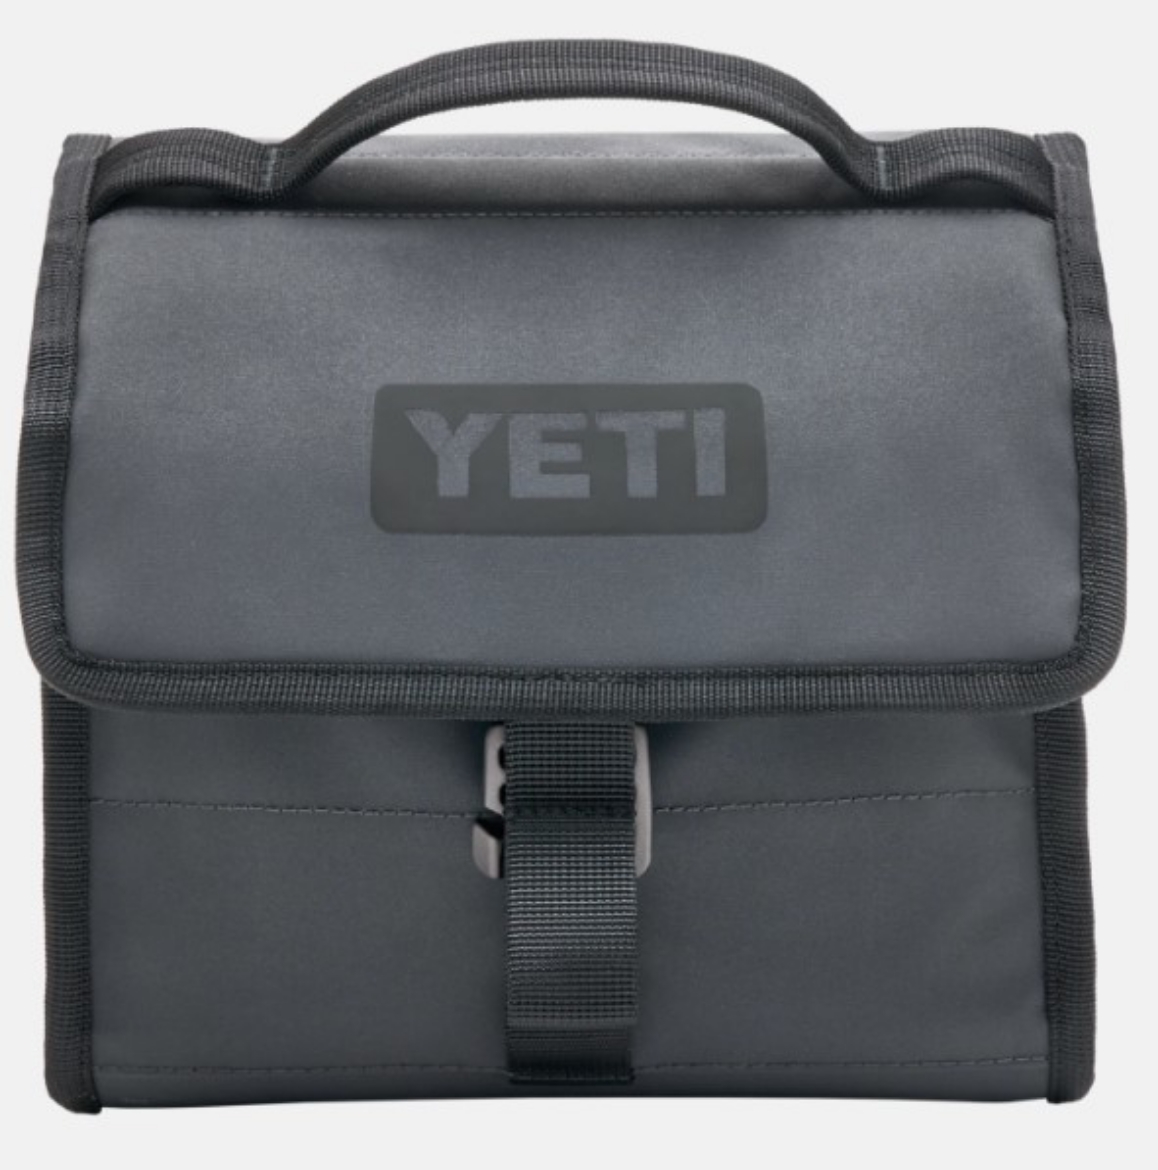 Picture of YETI DAYTRIP® LUNCH BAG